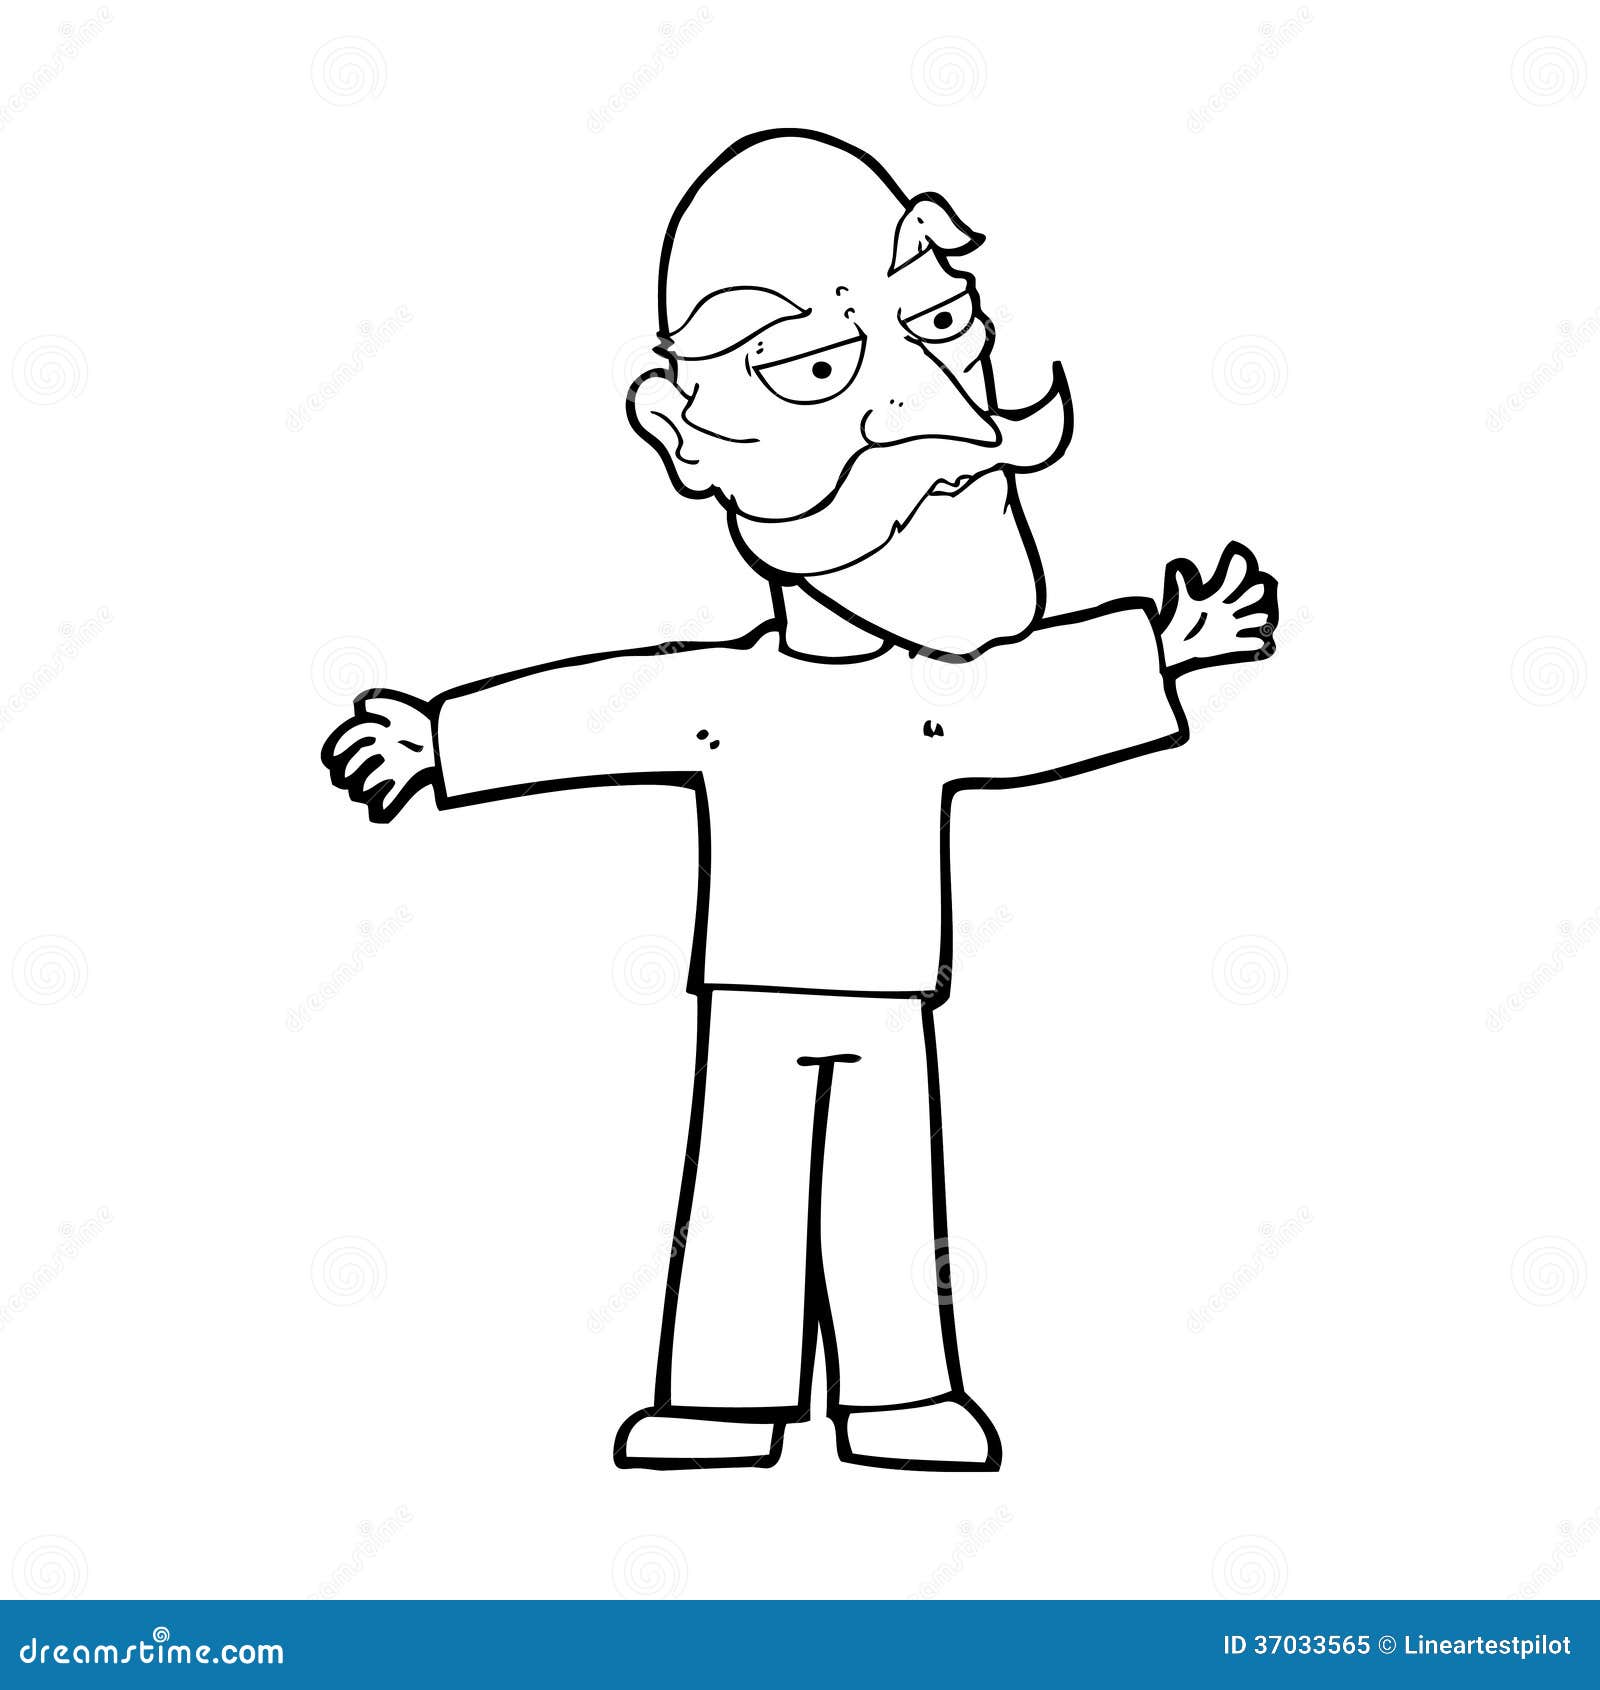 Cartoon Old Man Spreading Arms Wide Royalty Free Stock Photo - Image